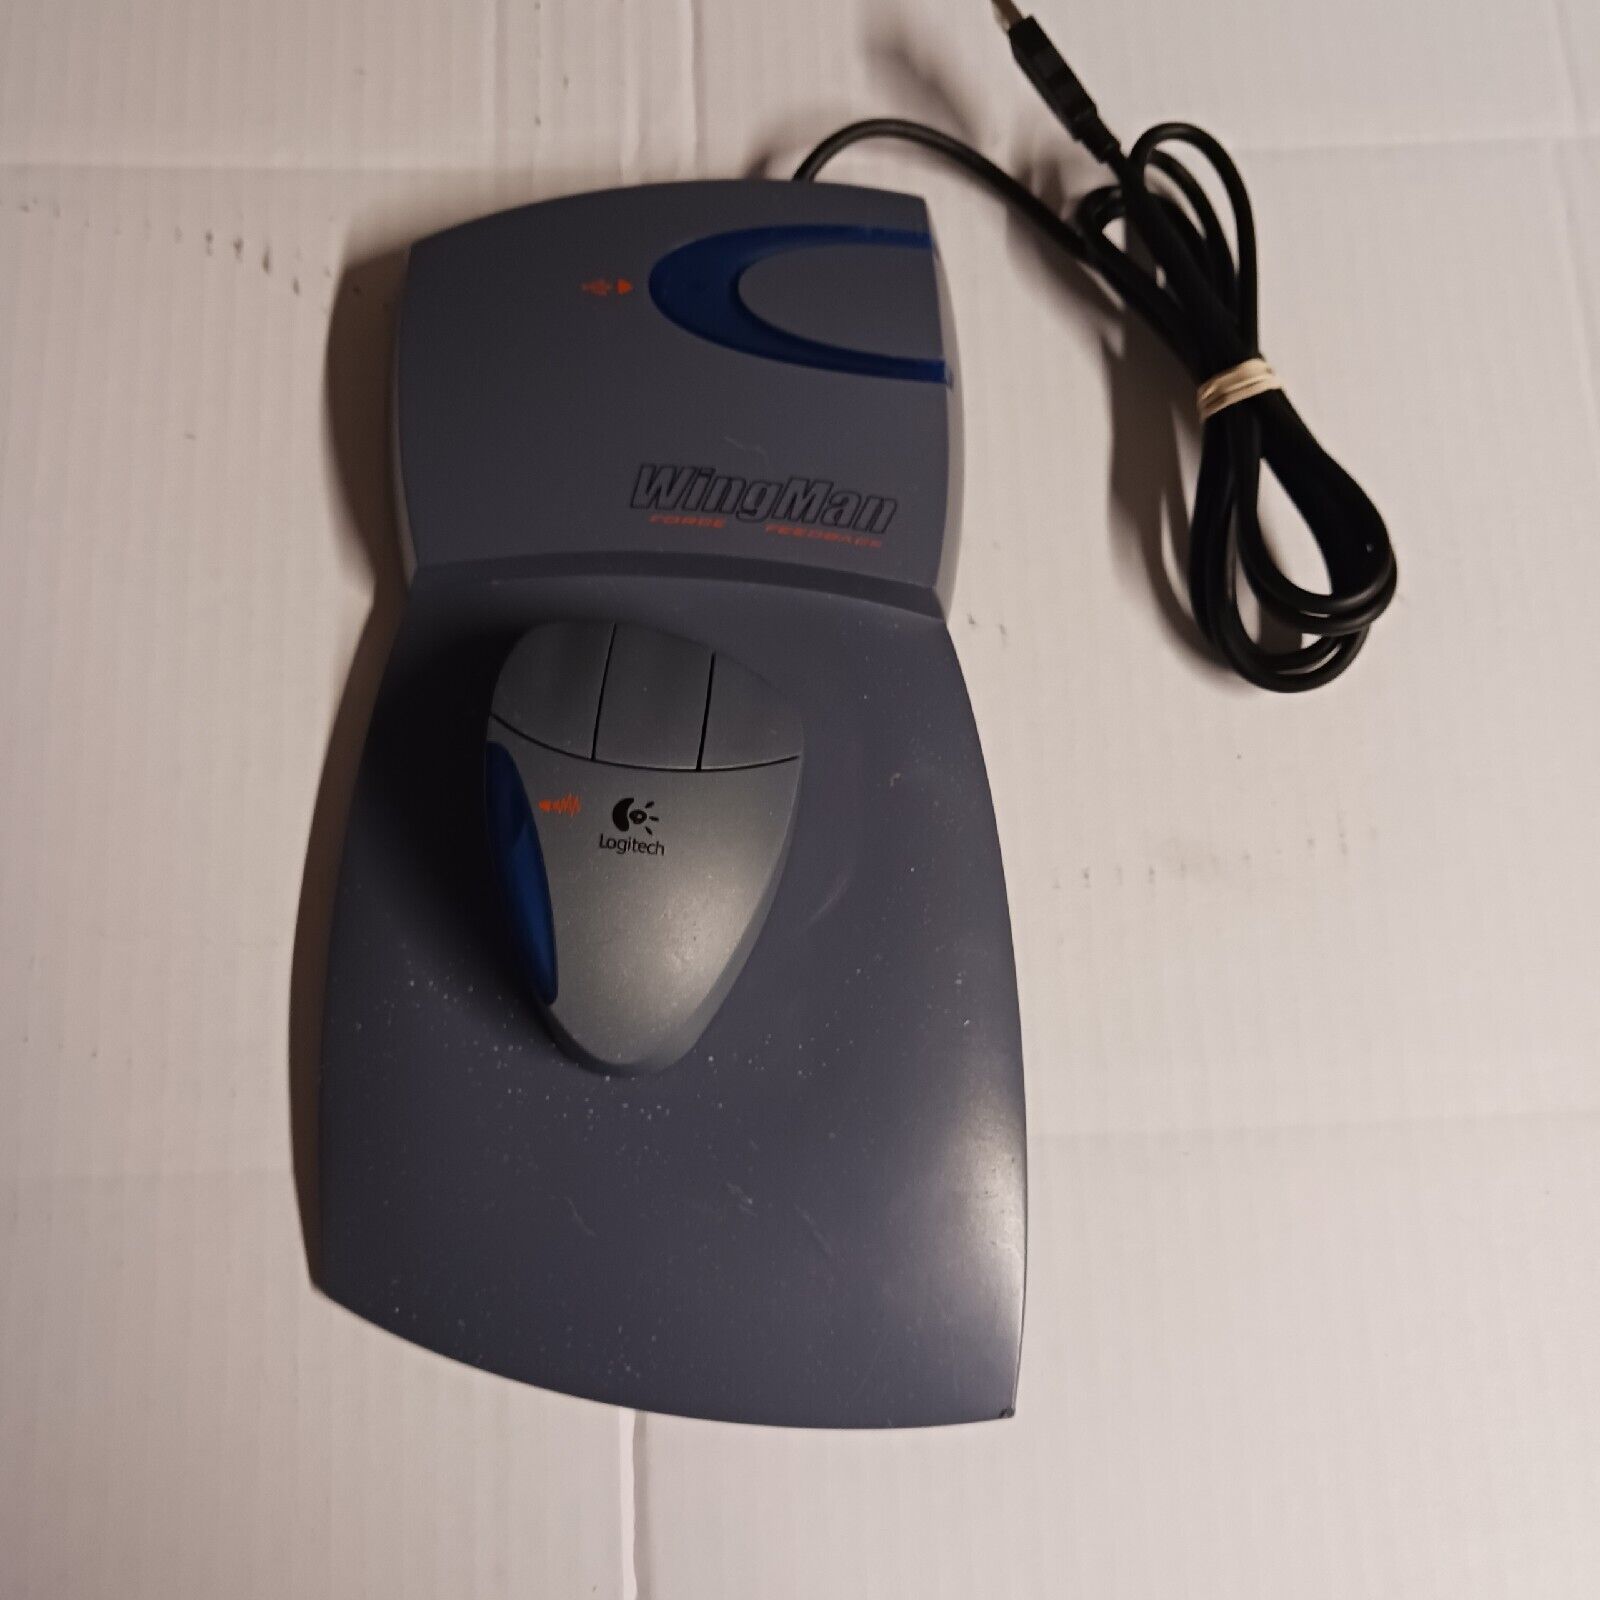 Logitech The First Gaming Mouse WingMan Force Feedback ULTRA RARE Collectors 